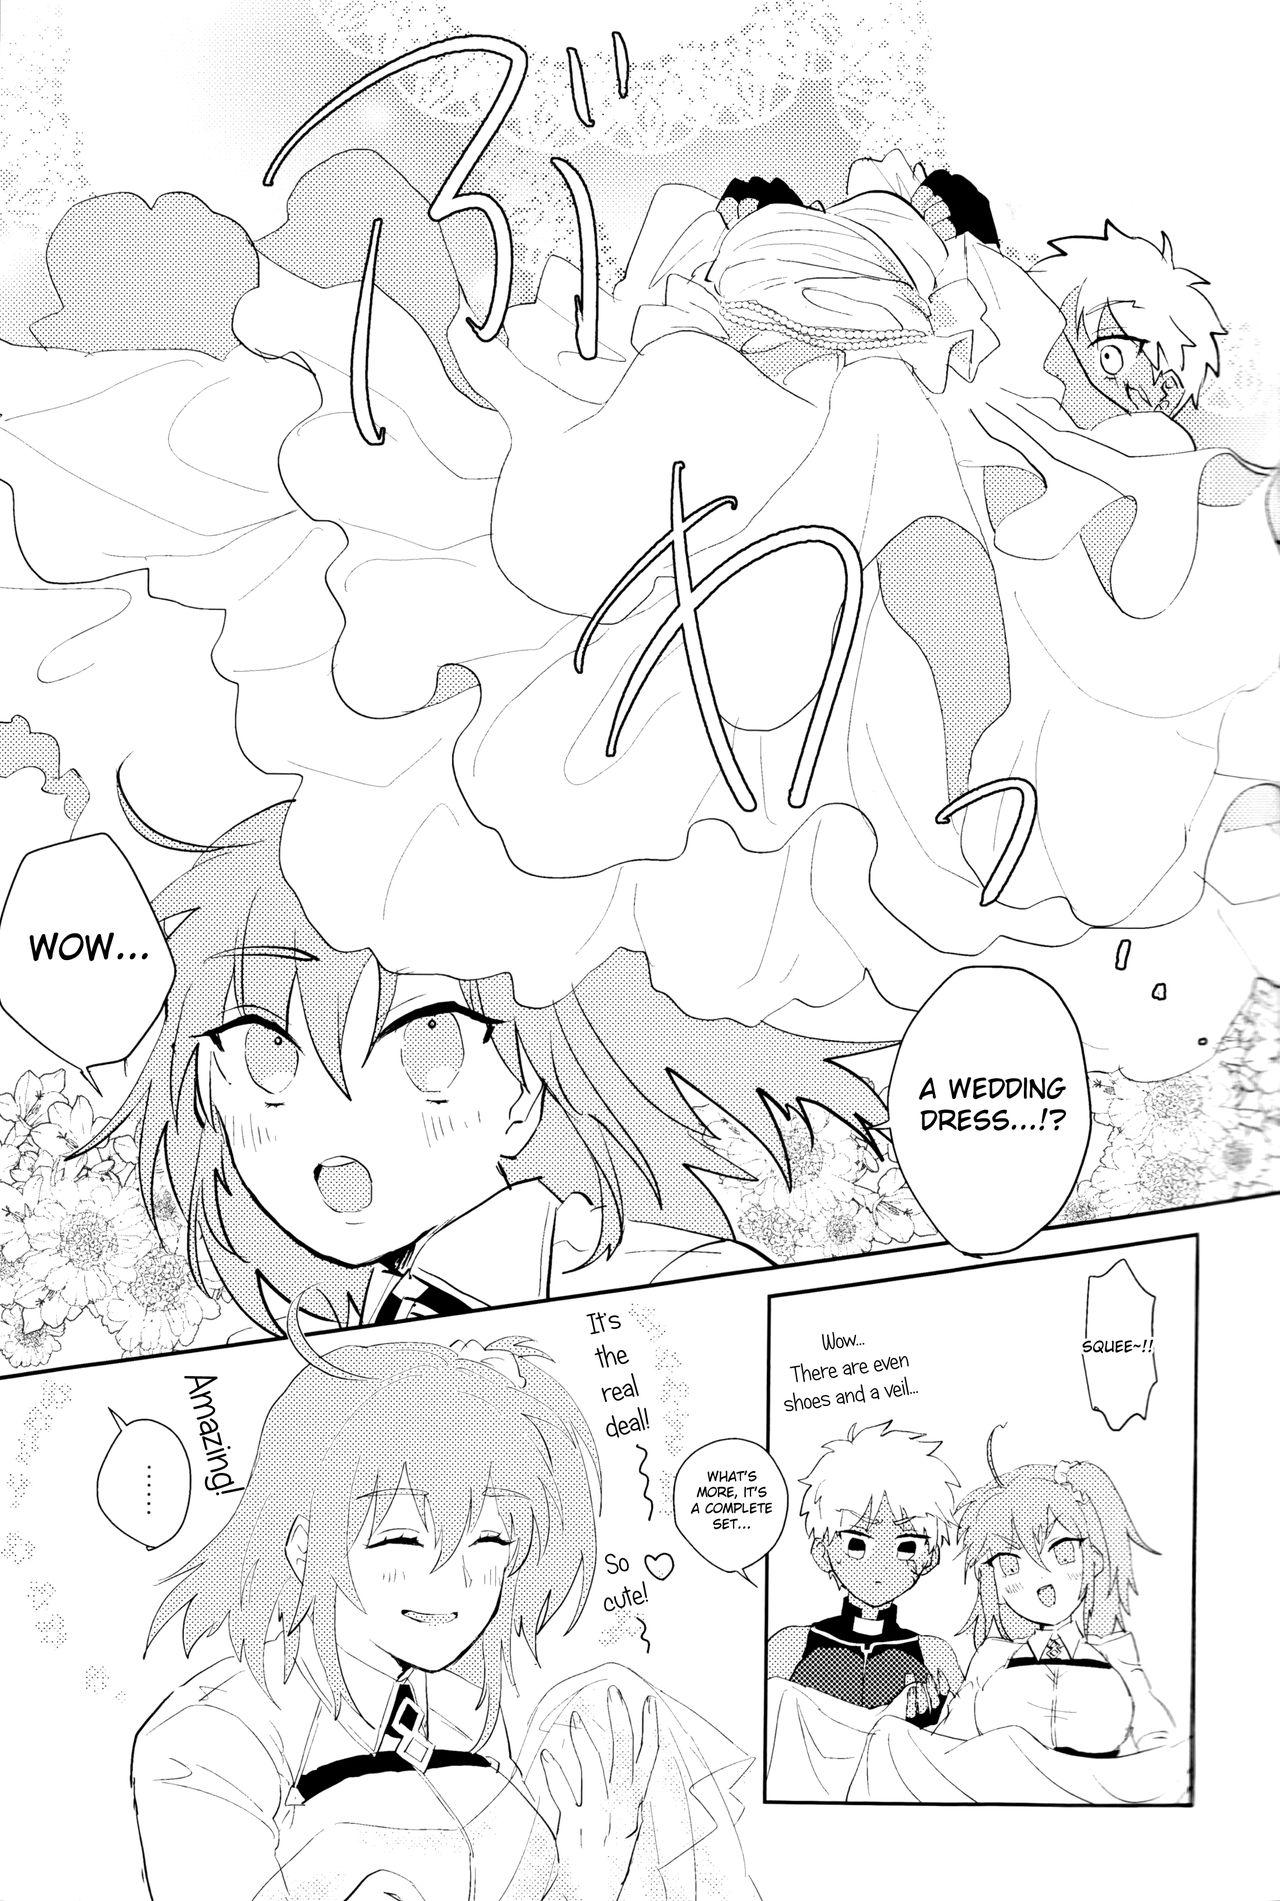 Squirting Seventh Heavens Story - Fate grand order Porno - Page 6